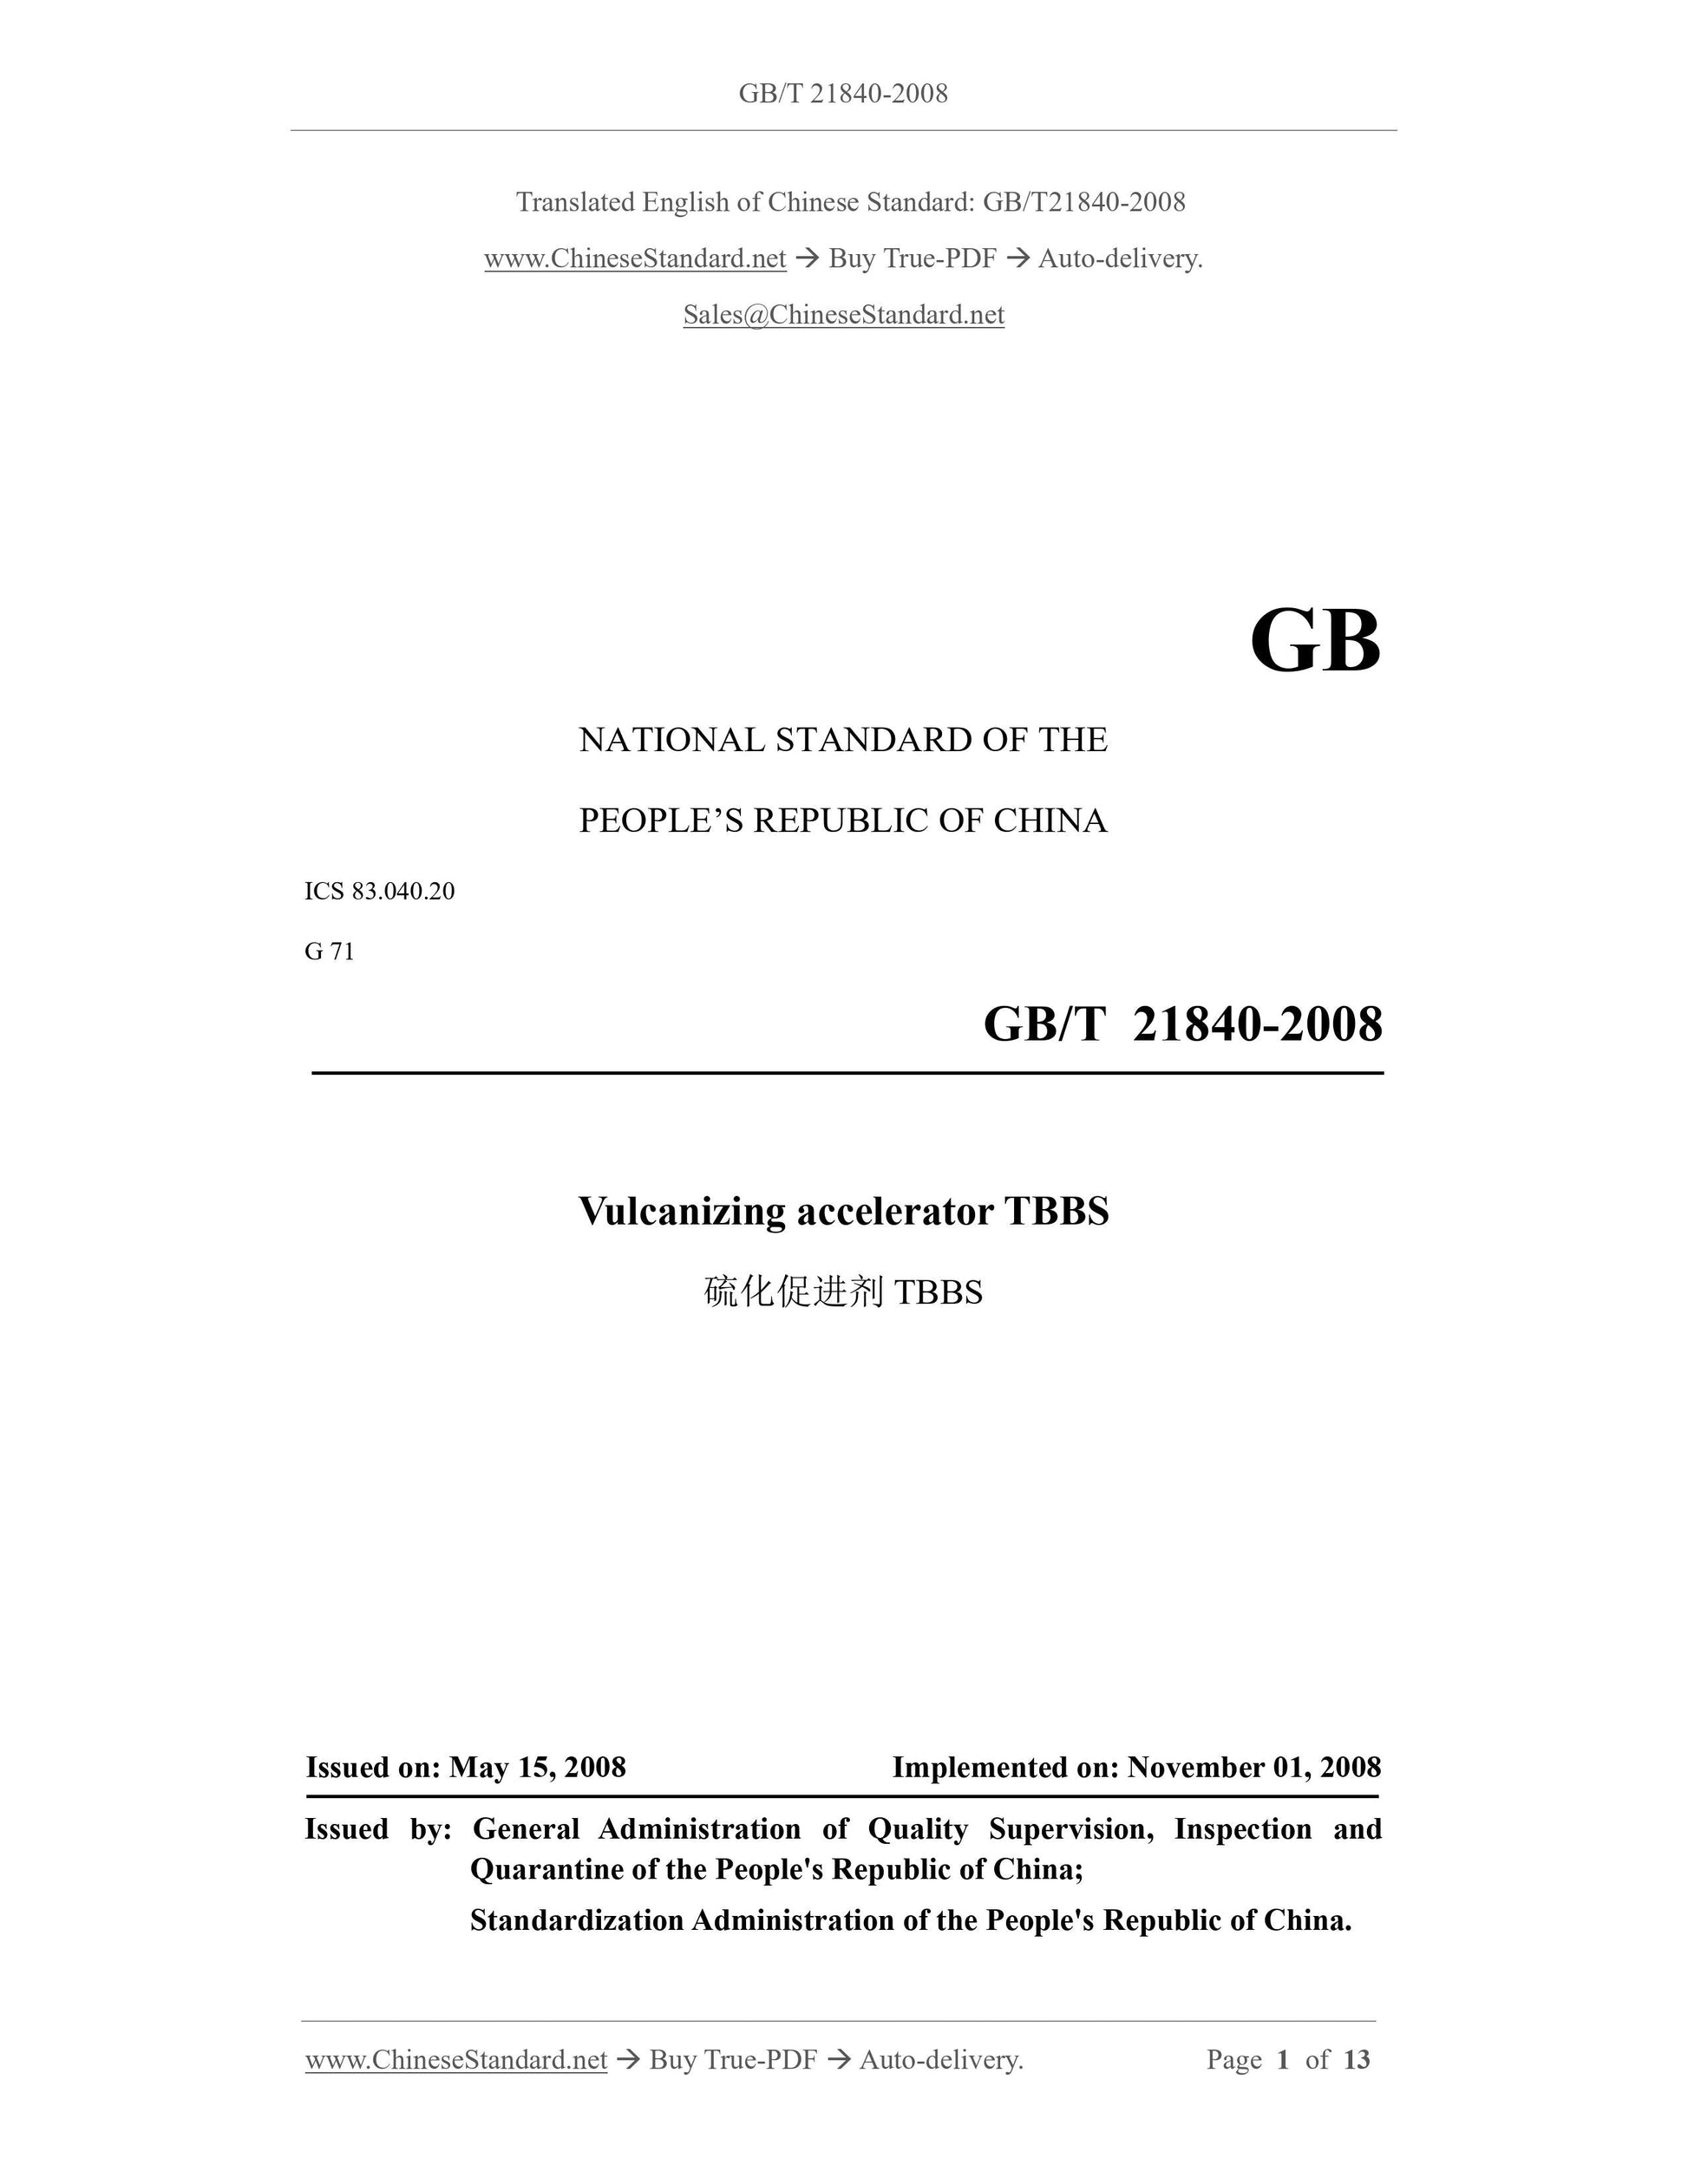 GB/T 21840-2008 Page 1